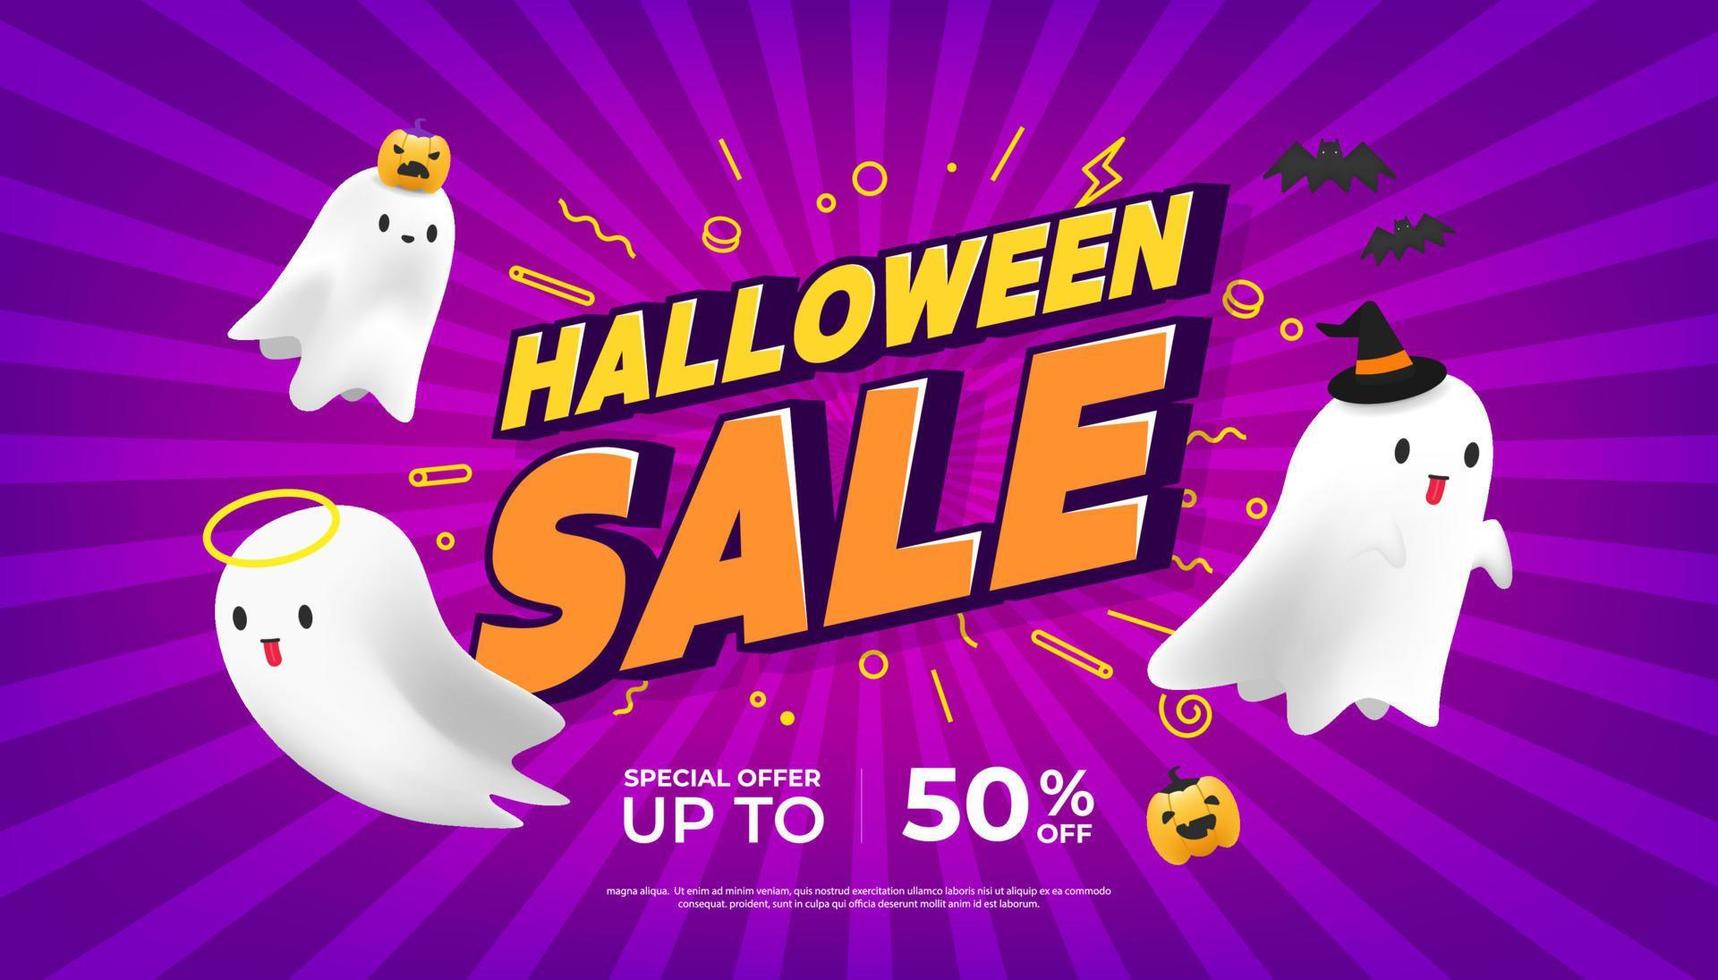 Halloween sale banner template design. Halloween sale event with cute ghosts on purple background. Social media, shopping online. vector